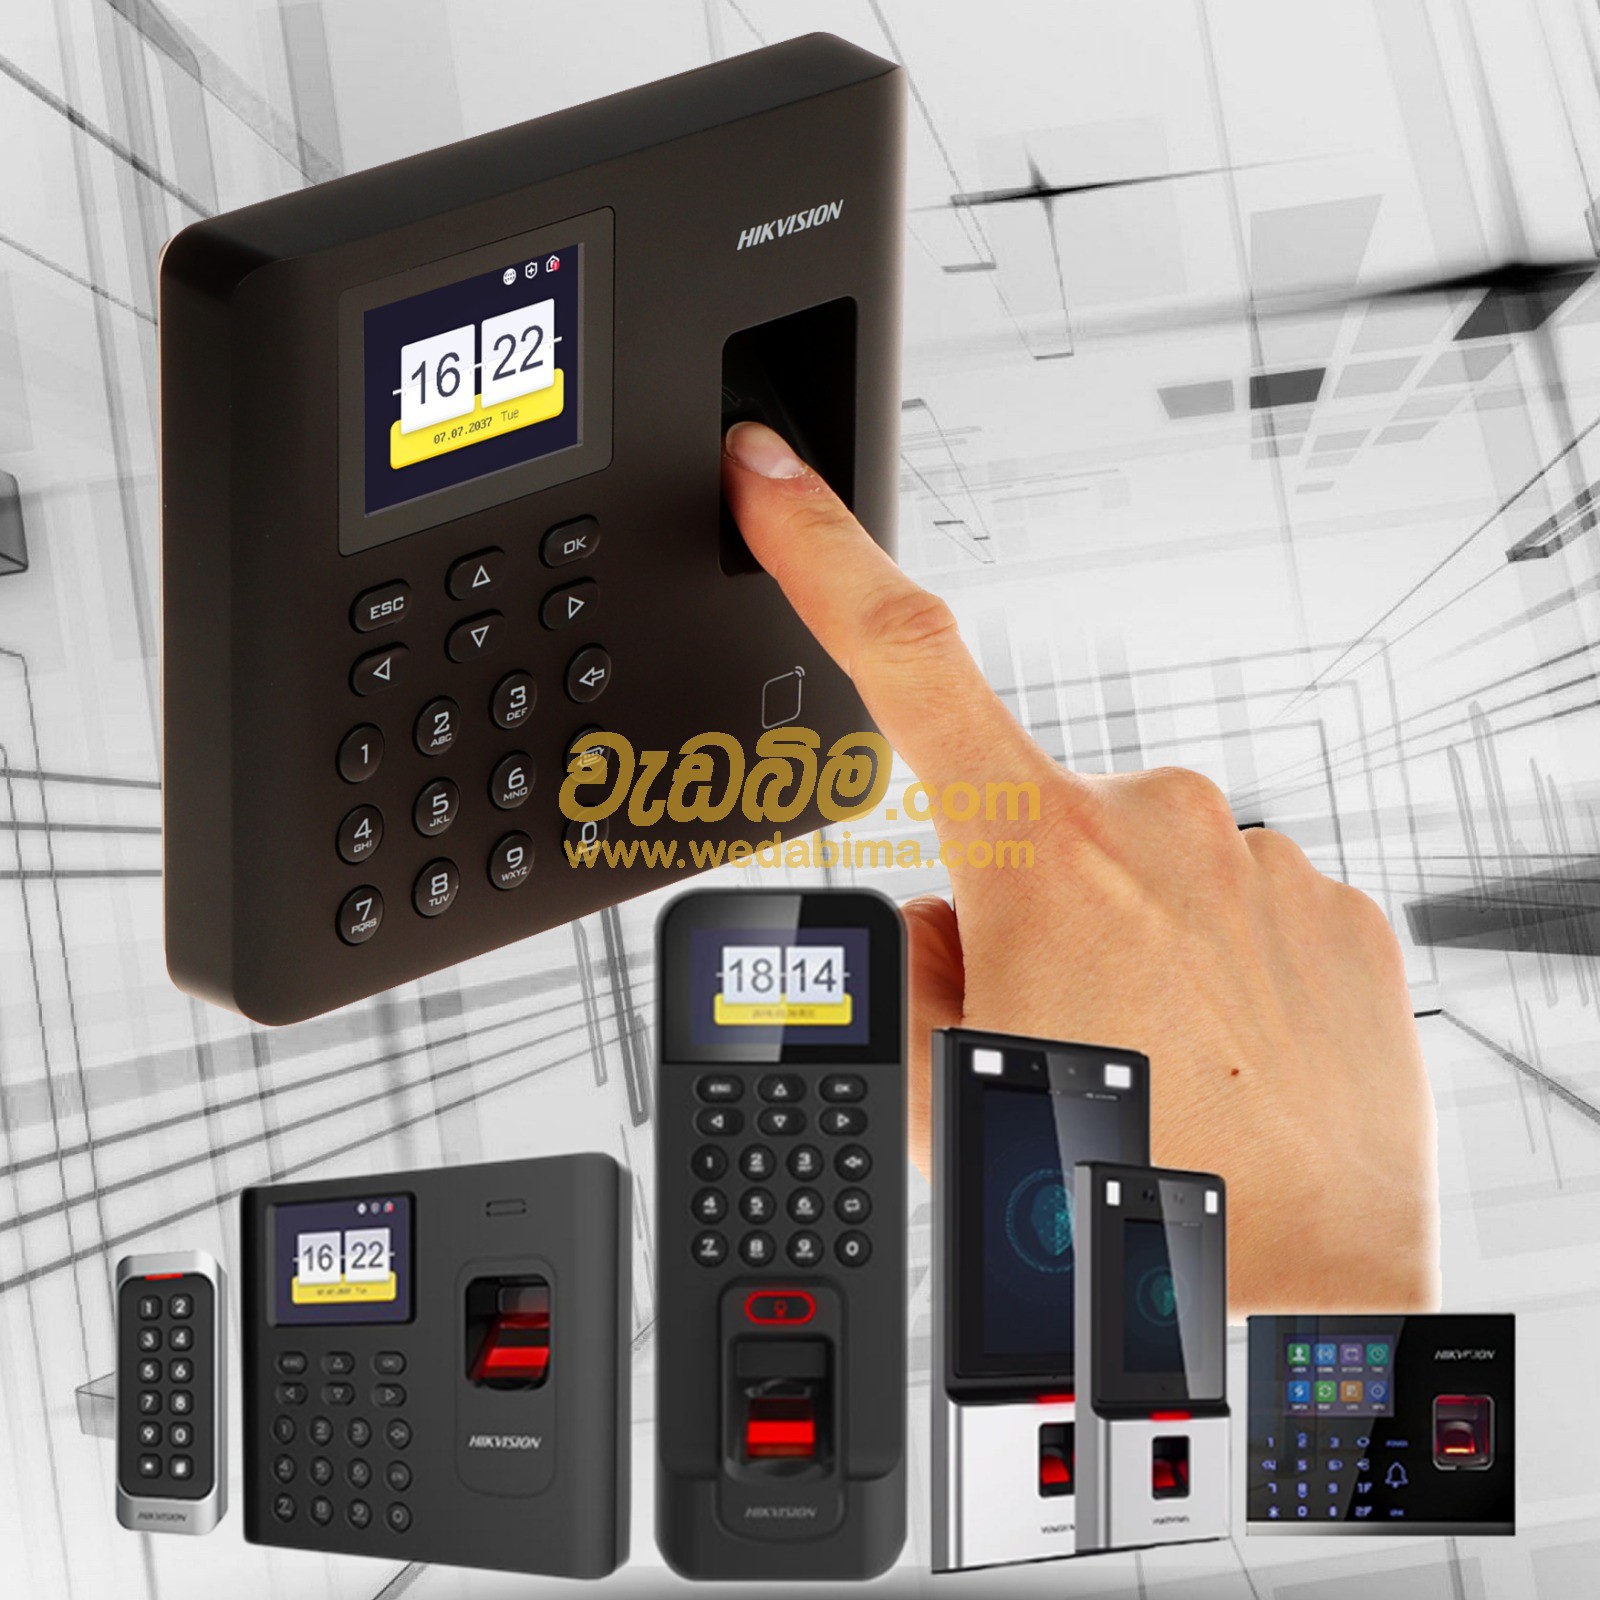 Cover image for access control system price in sri lanka